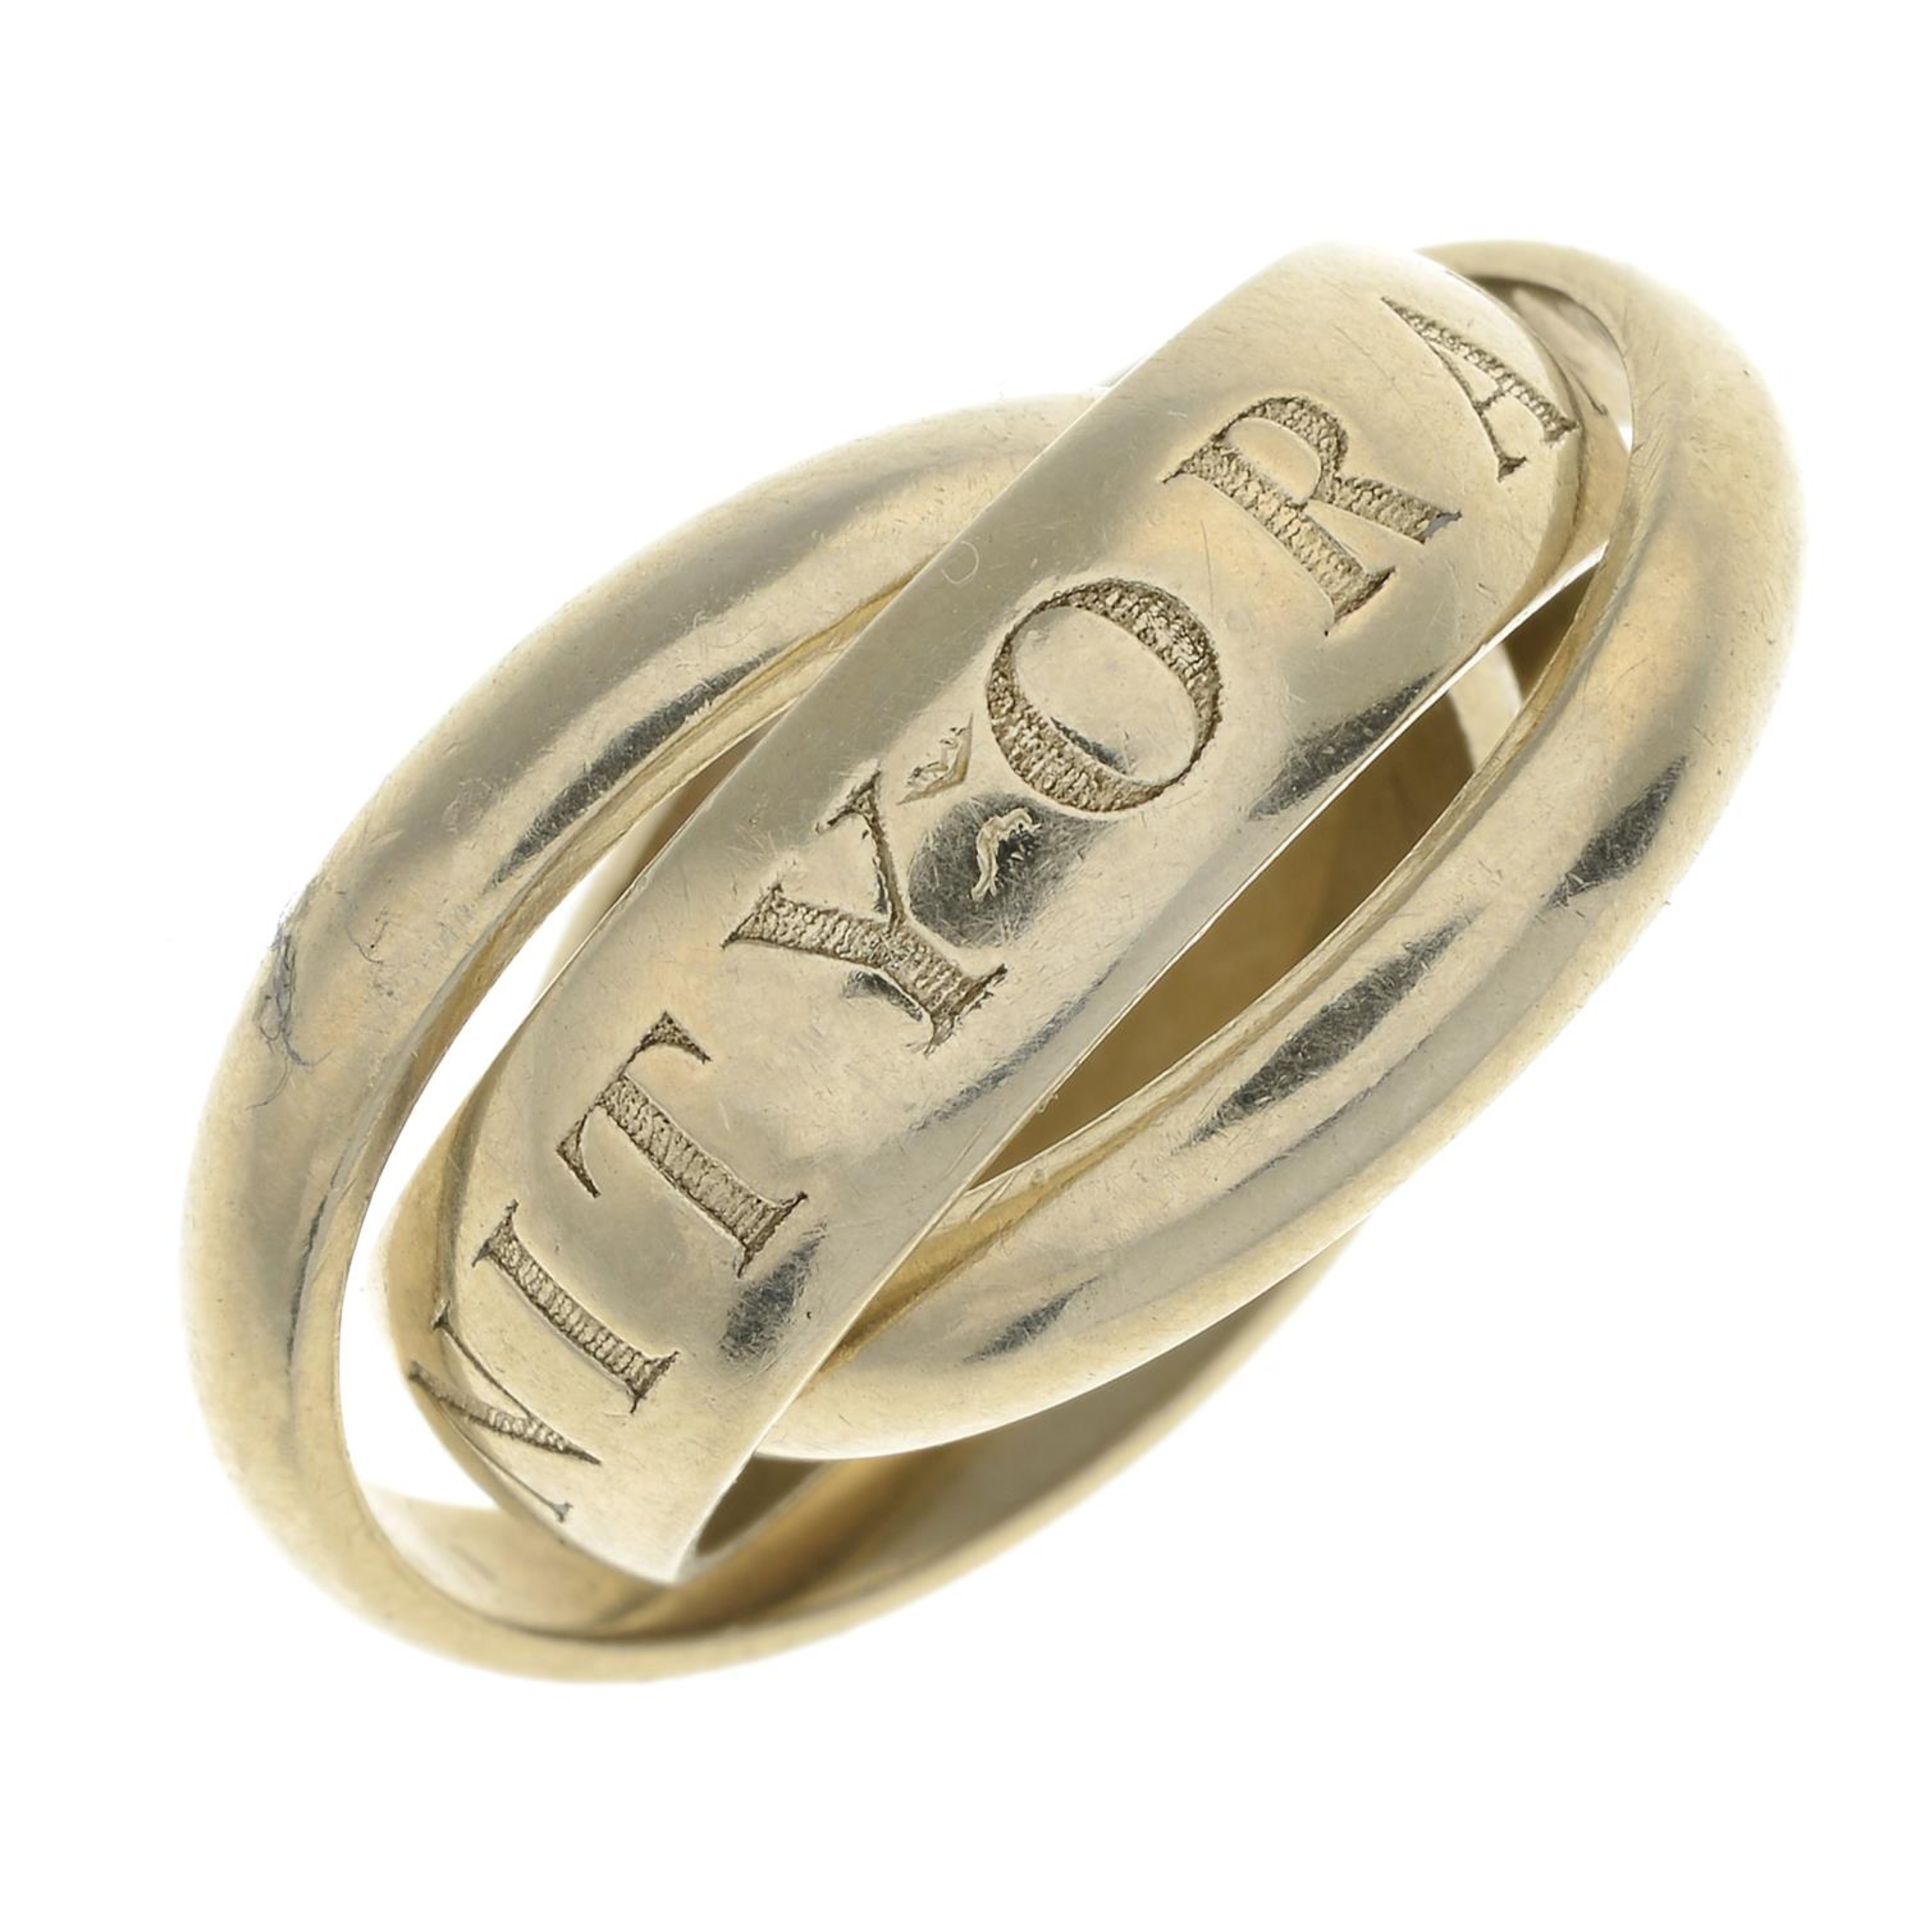 A 'Trinity or Amour' ring, by Cartier.Makers marks for Cartier.